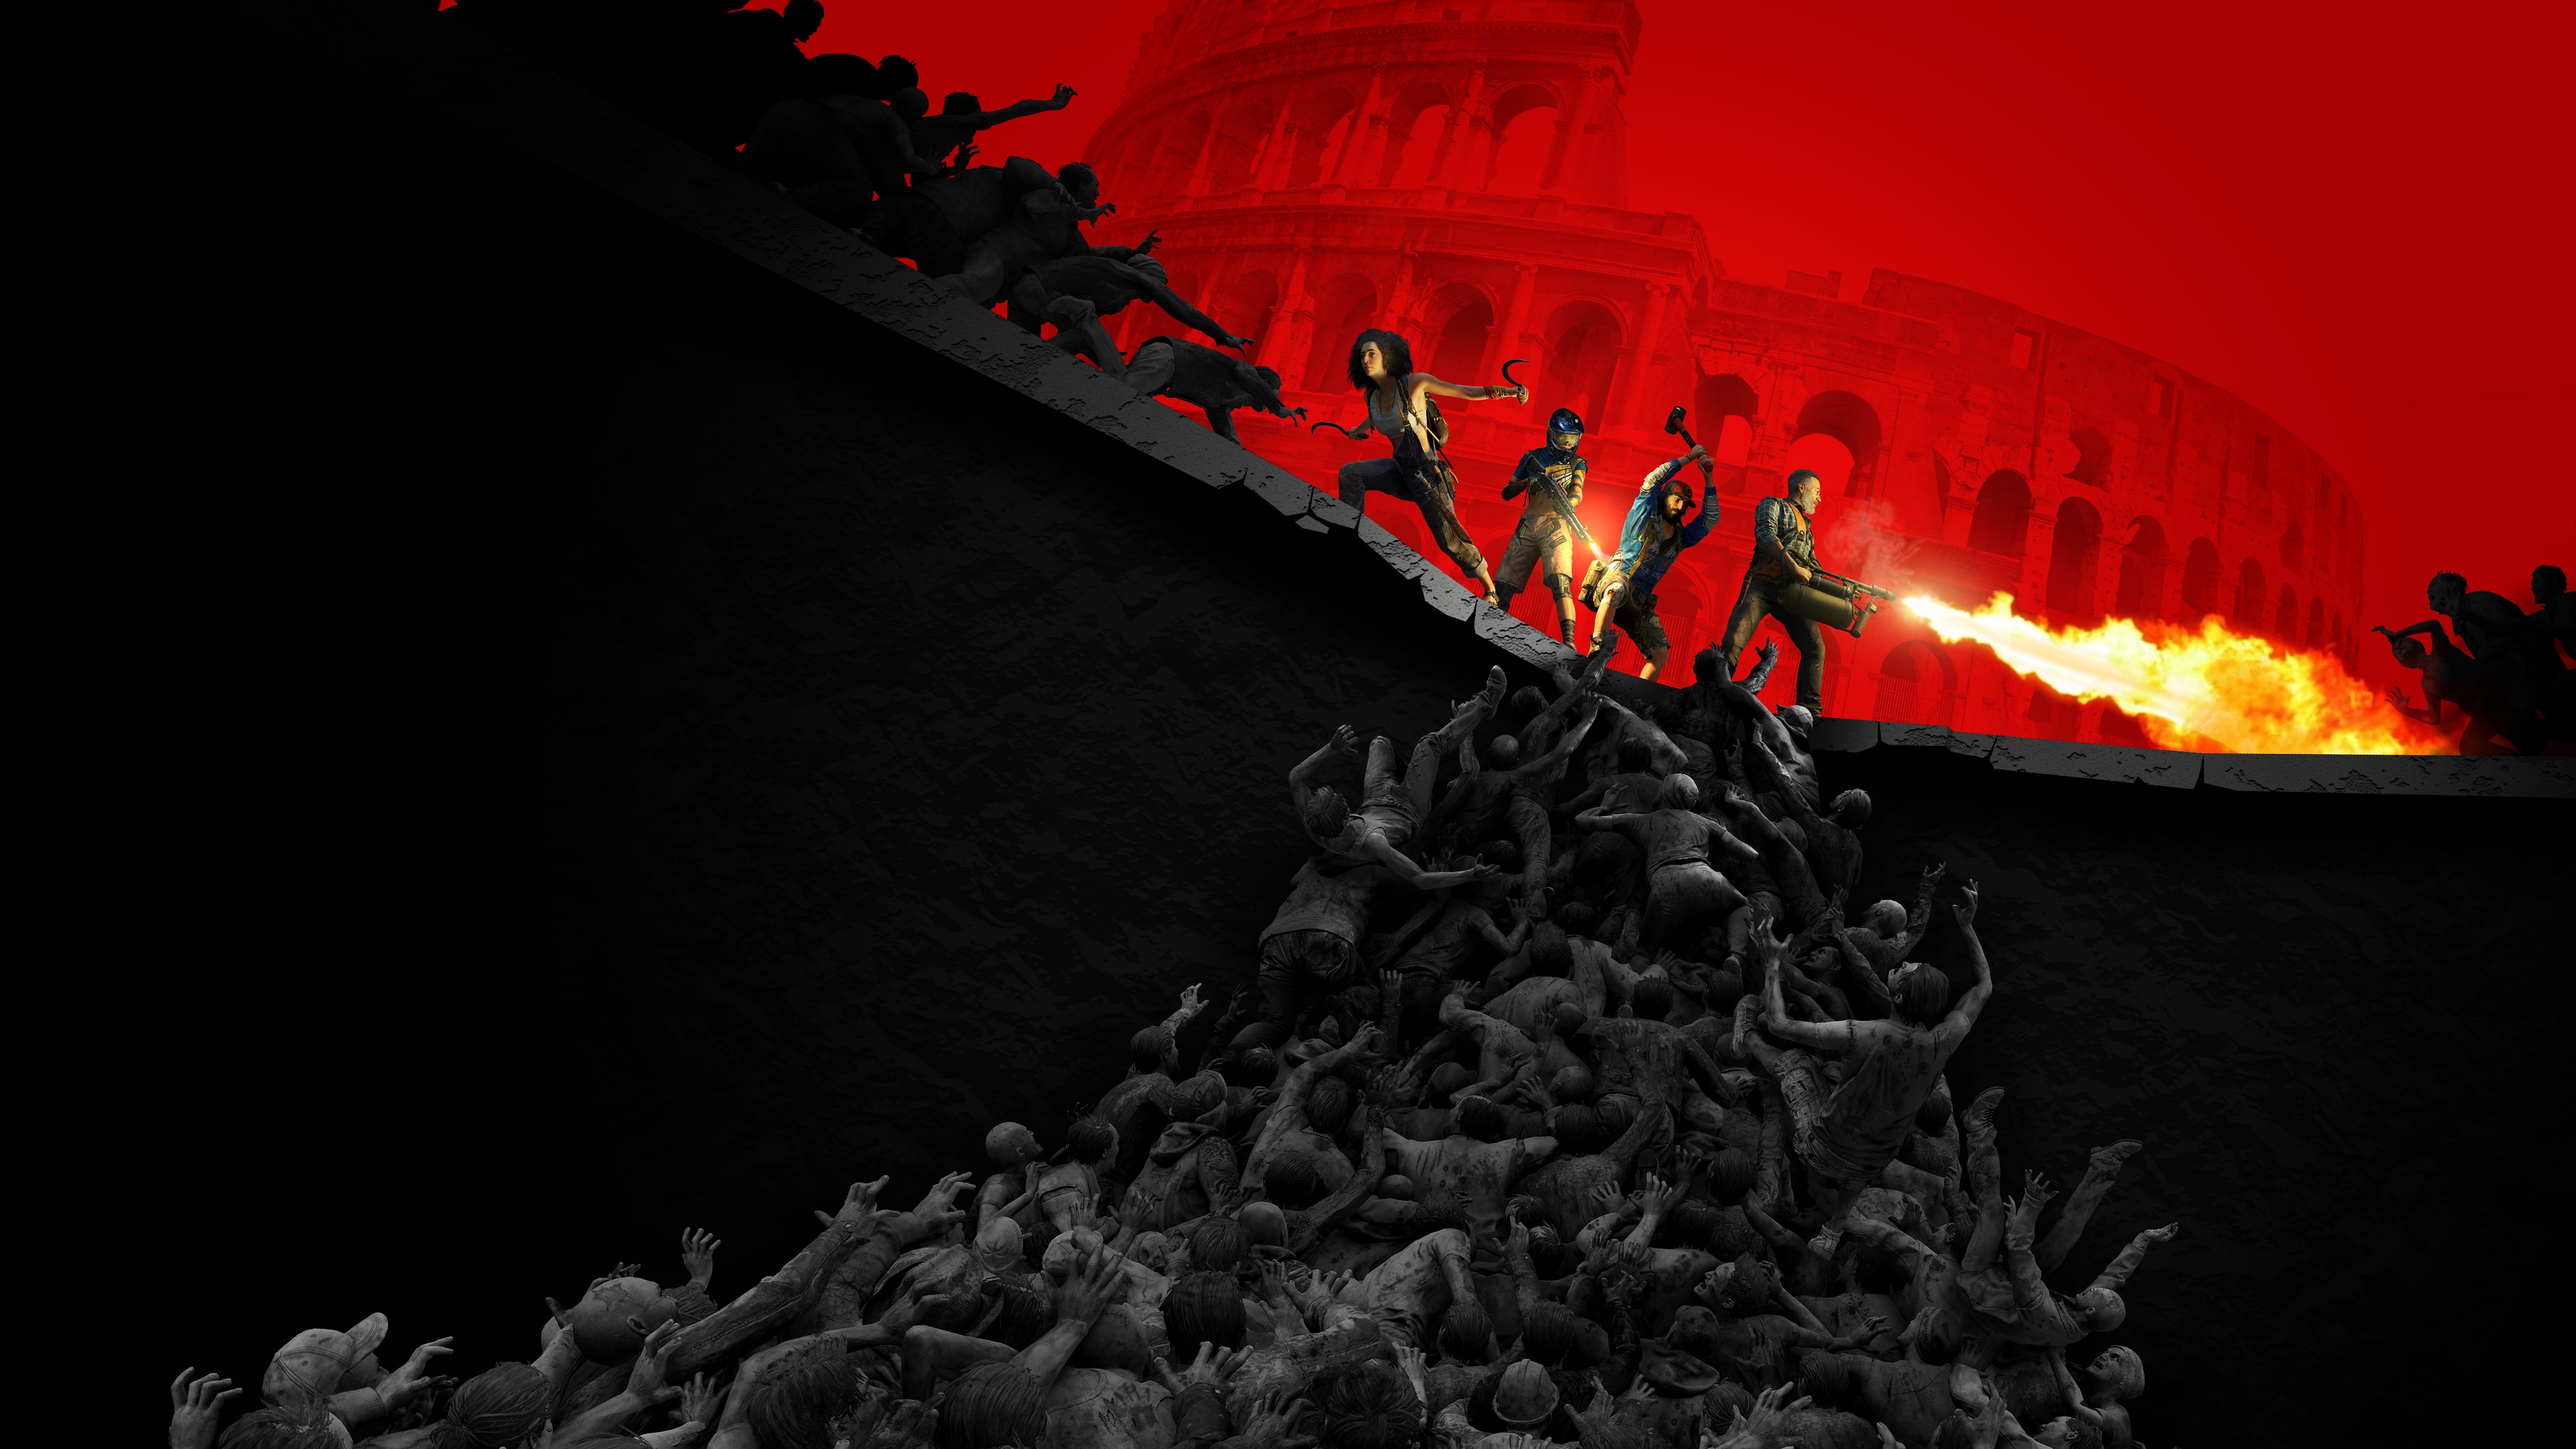 World War Z: Aftermath (Simplified Chinese, English, Korean, Traditional Chinese)